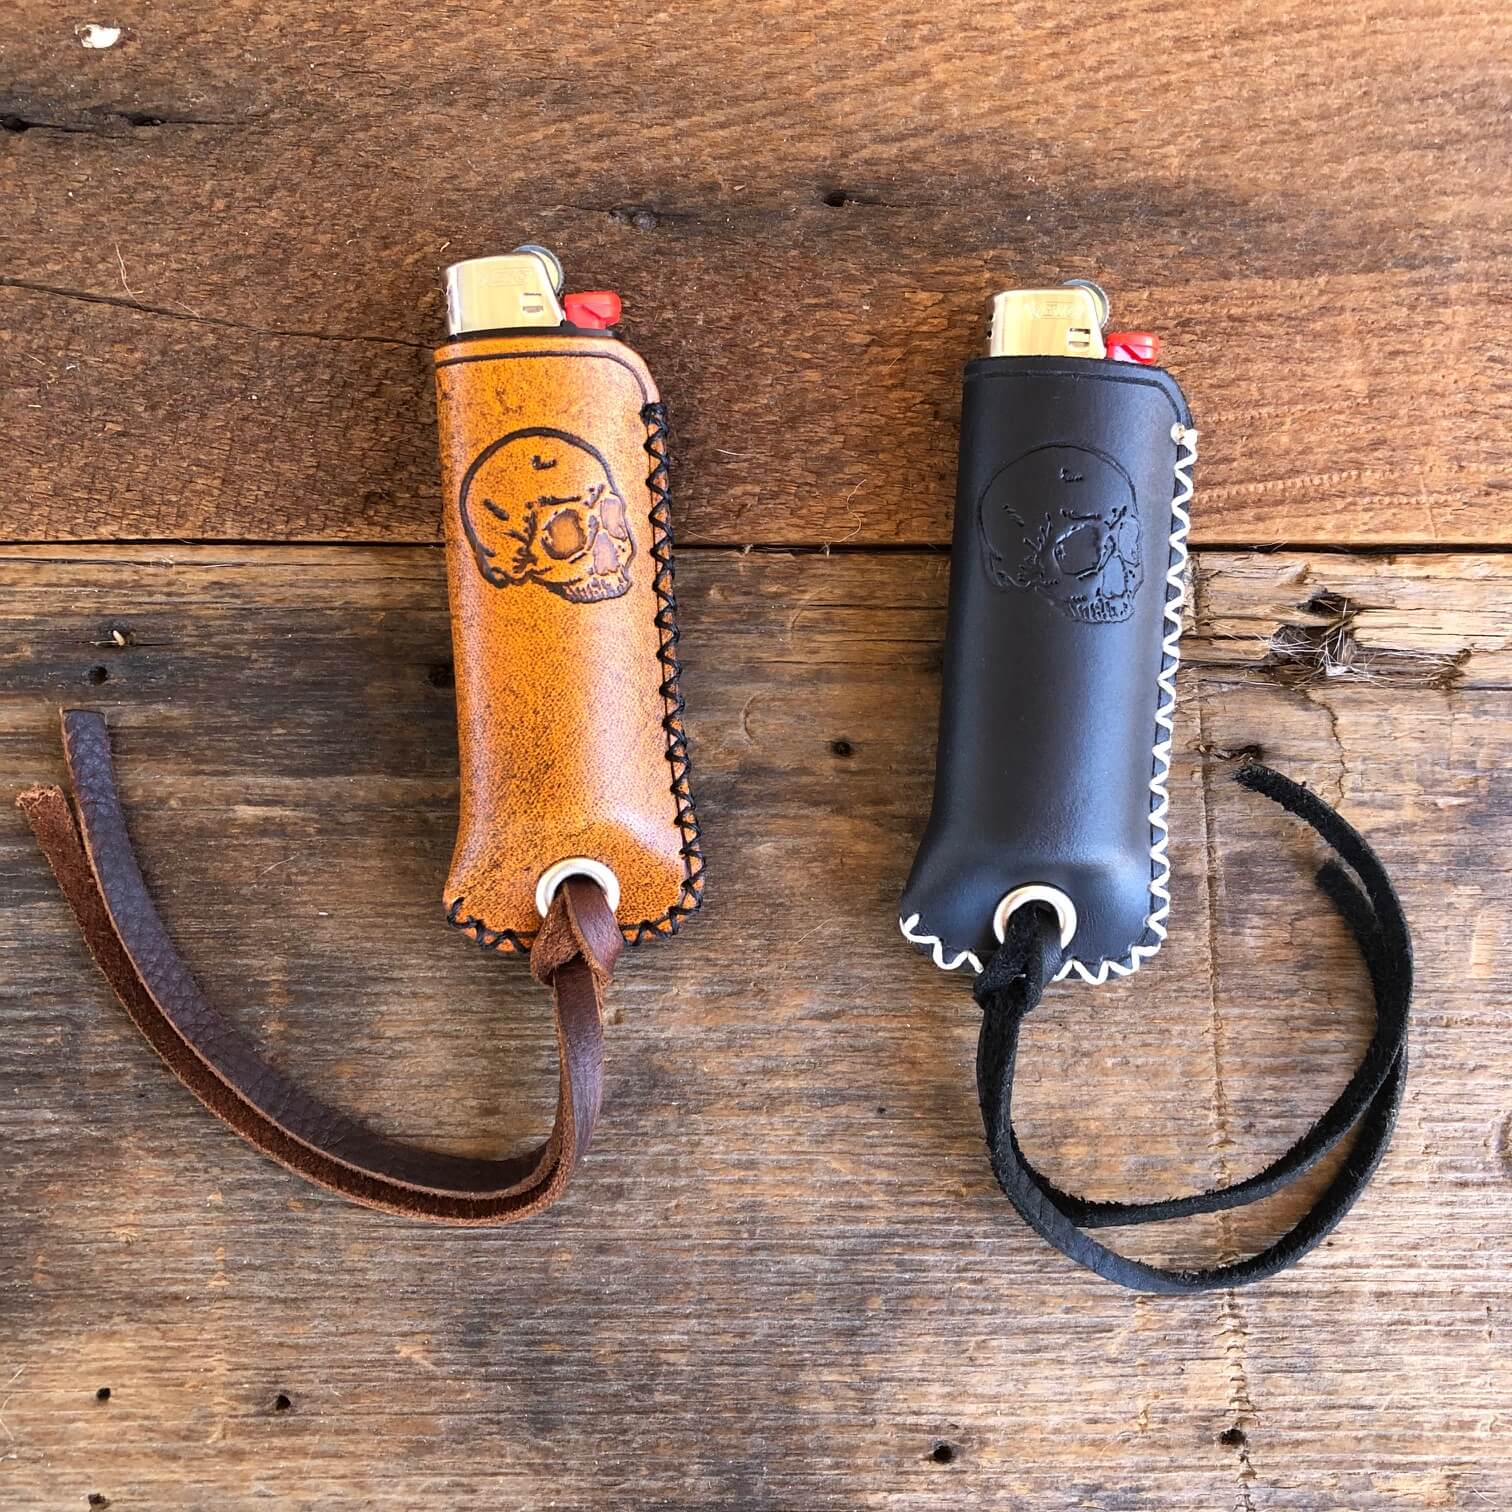 Leather Case fits Standard Size BIC Lighters Custom Made